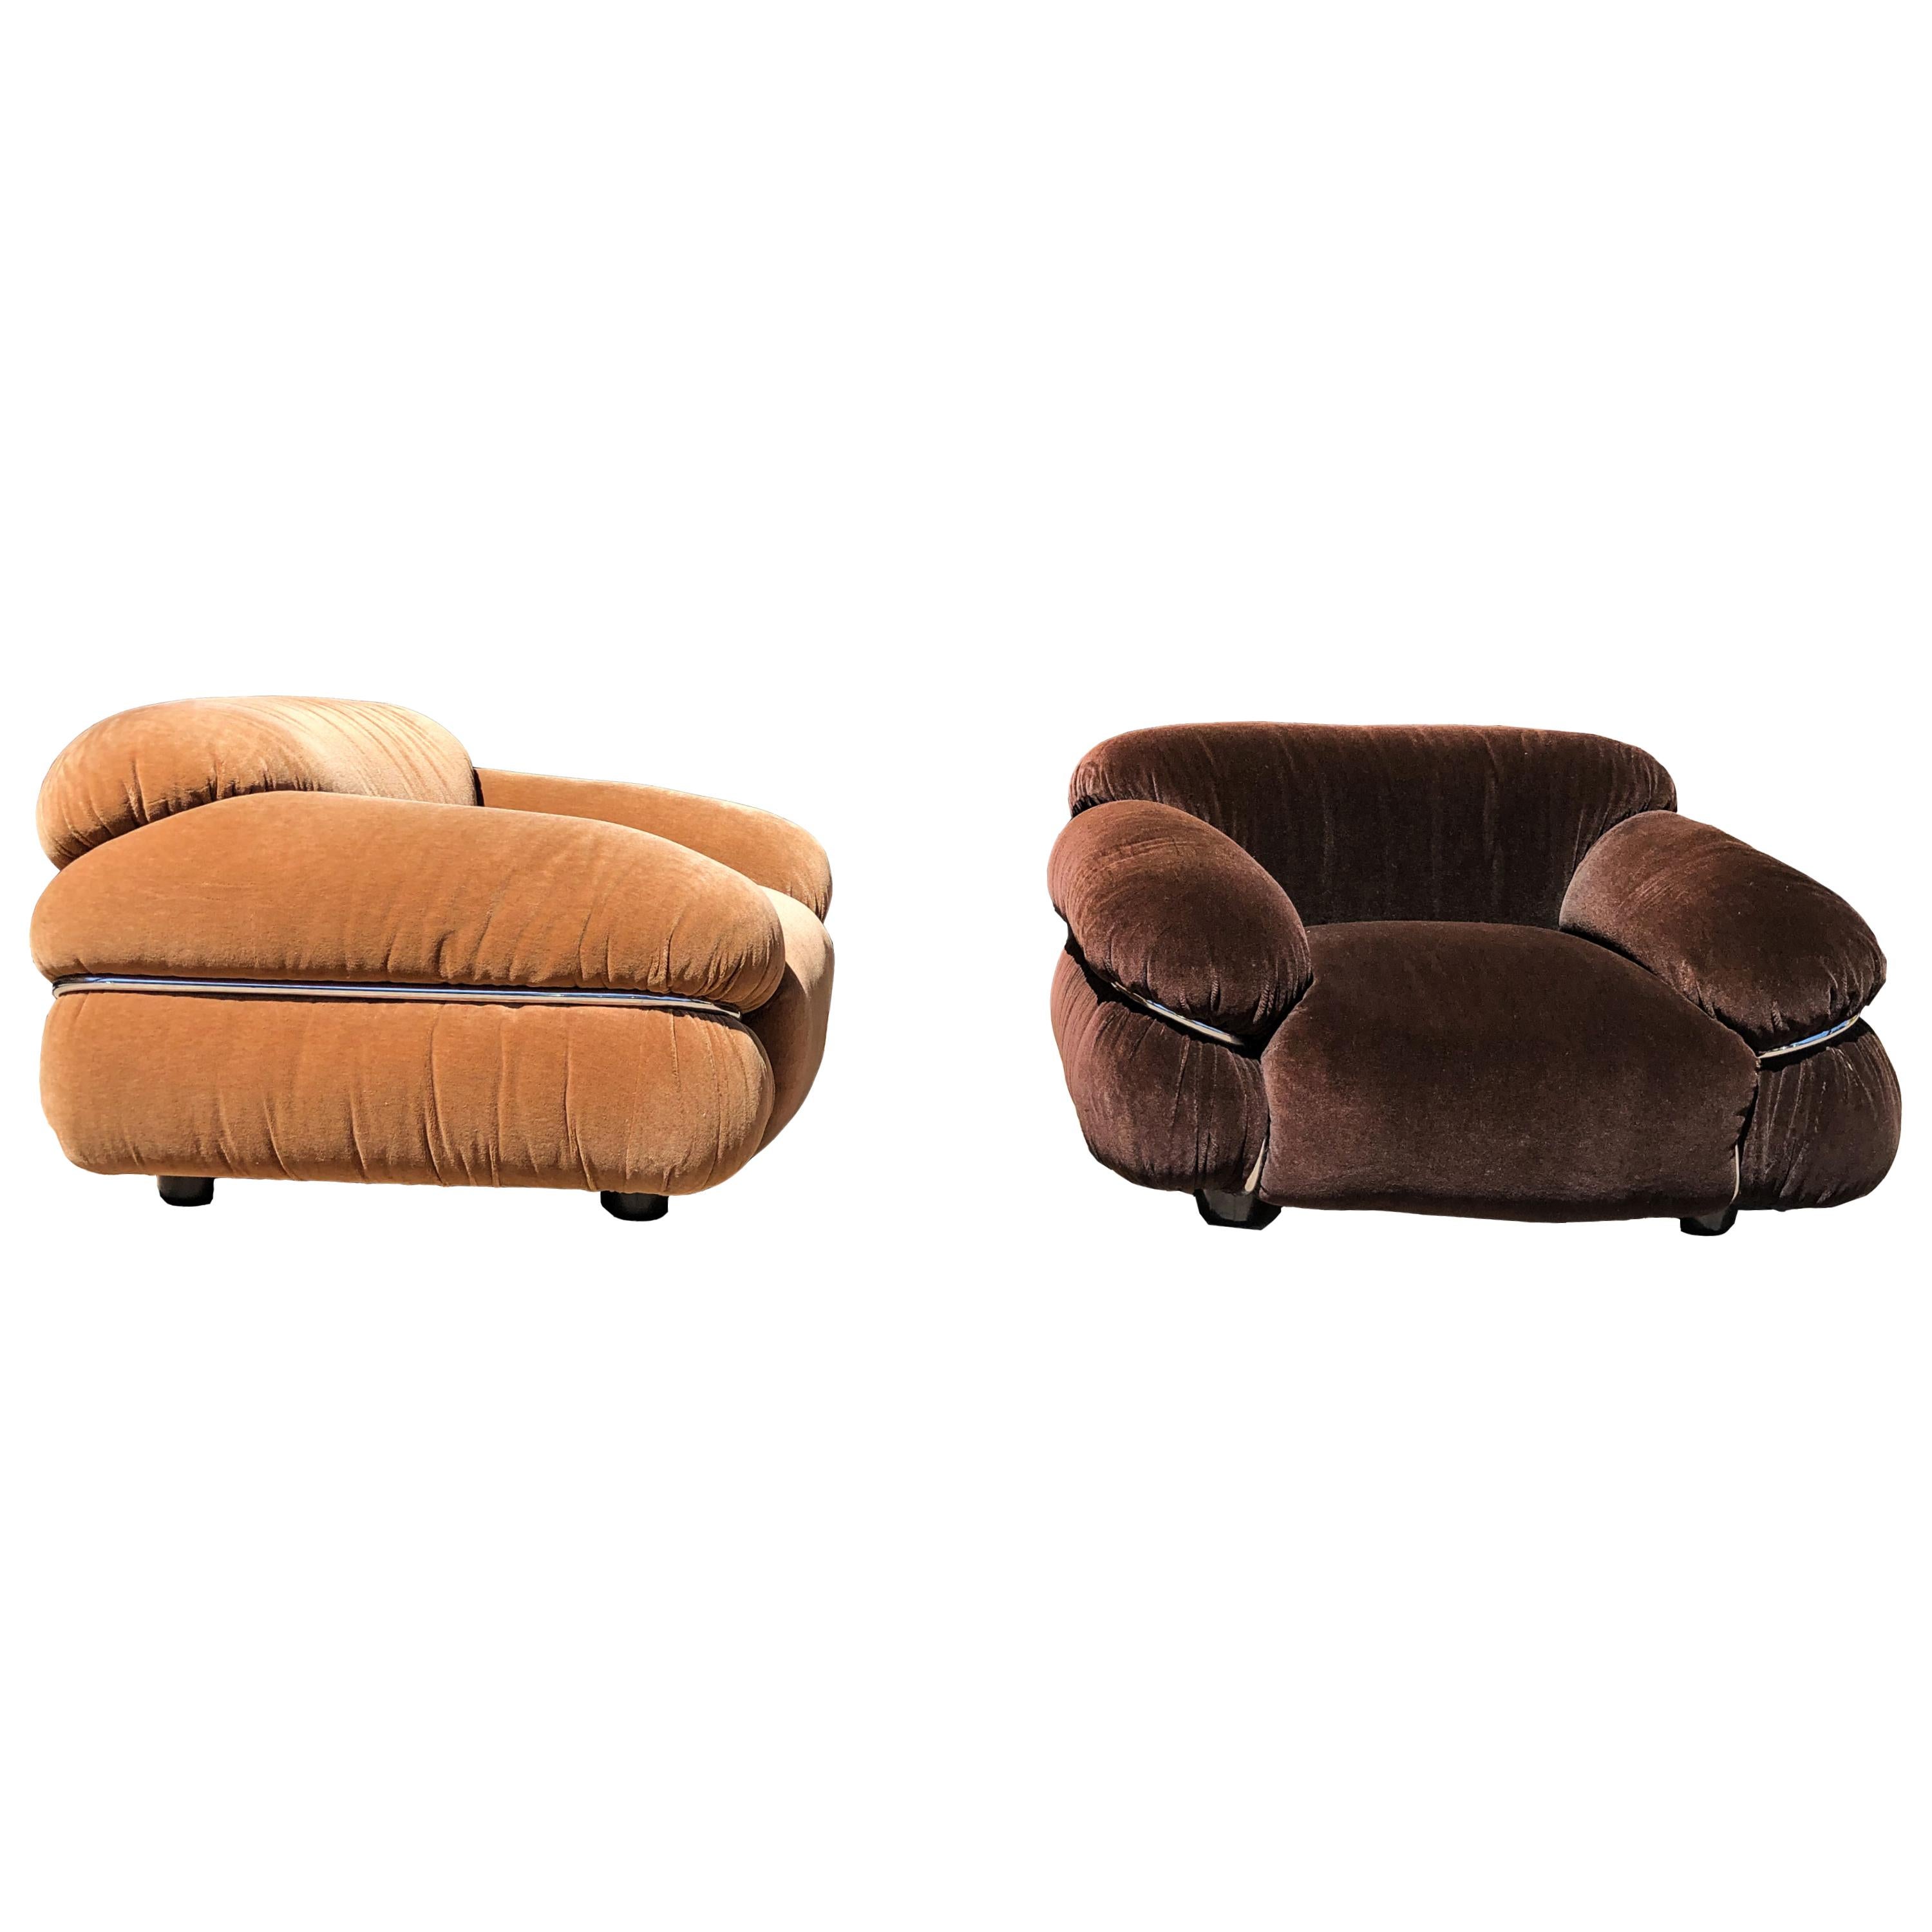 The Sesann lounge chair was designed by Gianfranco Frattini in 1970 and produced by the Italian manufacturer Cassina.

This set is composed of two lounge chairs upholstered in tobacco and chocolate brown alpaca velvet.

Sesann is characterized